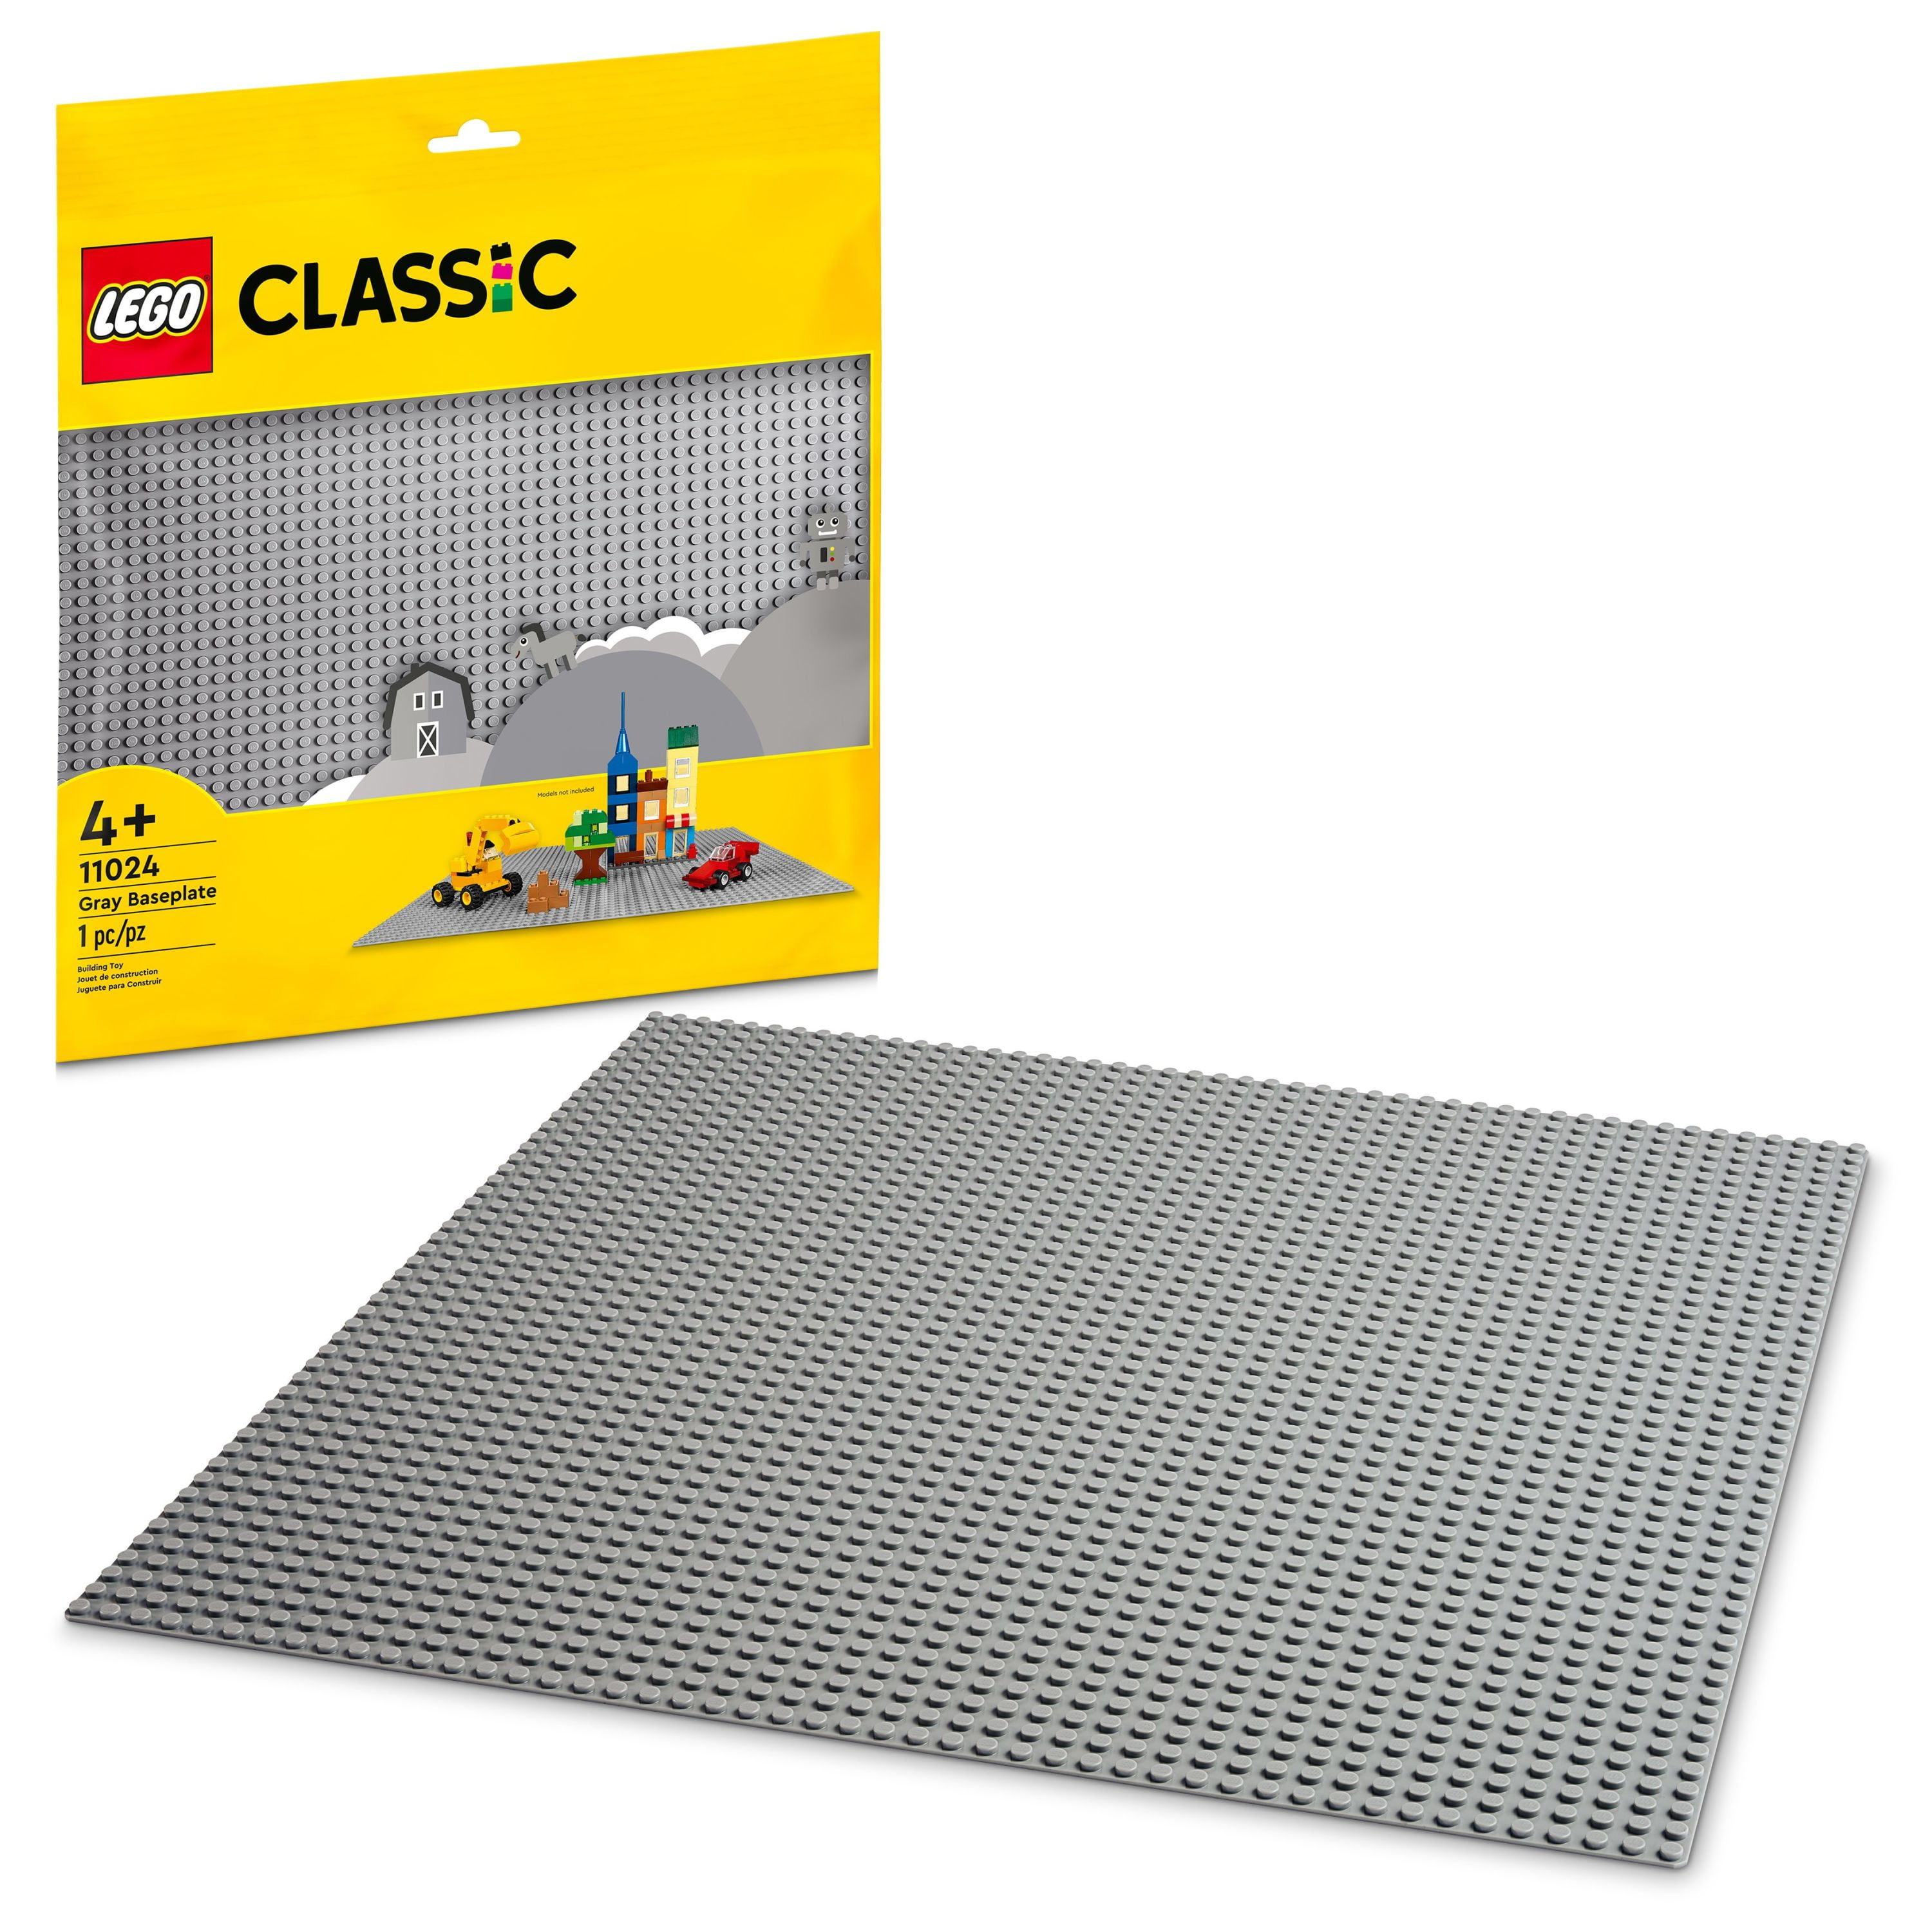 LEGO Classic Gray Baseplate 11024 Building Kit; Square 48x48 Landscape for Open-Ended Imaginative Building Play; Can Be Given as a Birthday, Holiday or Any-Day Gift for Kids Aged 4 and up (1 Piece)